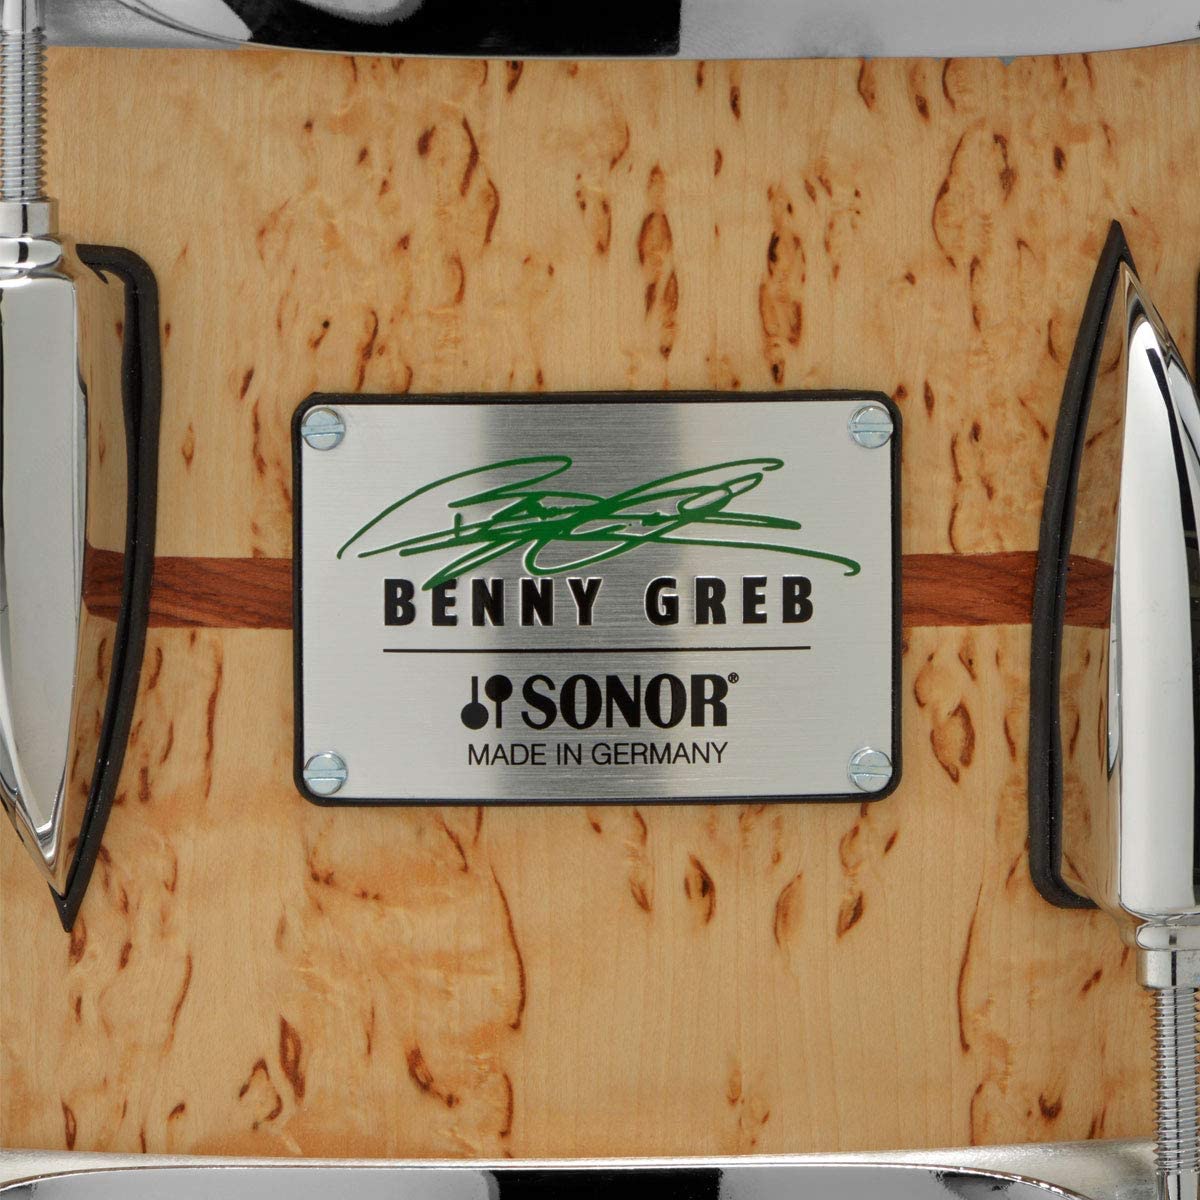 Sonor Benny Greb 2.0 13”x5.75” Snare Drum - Beech Wood